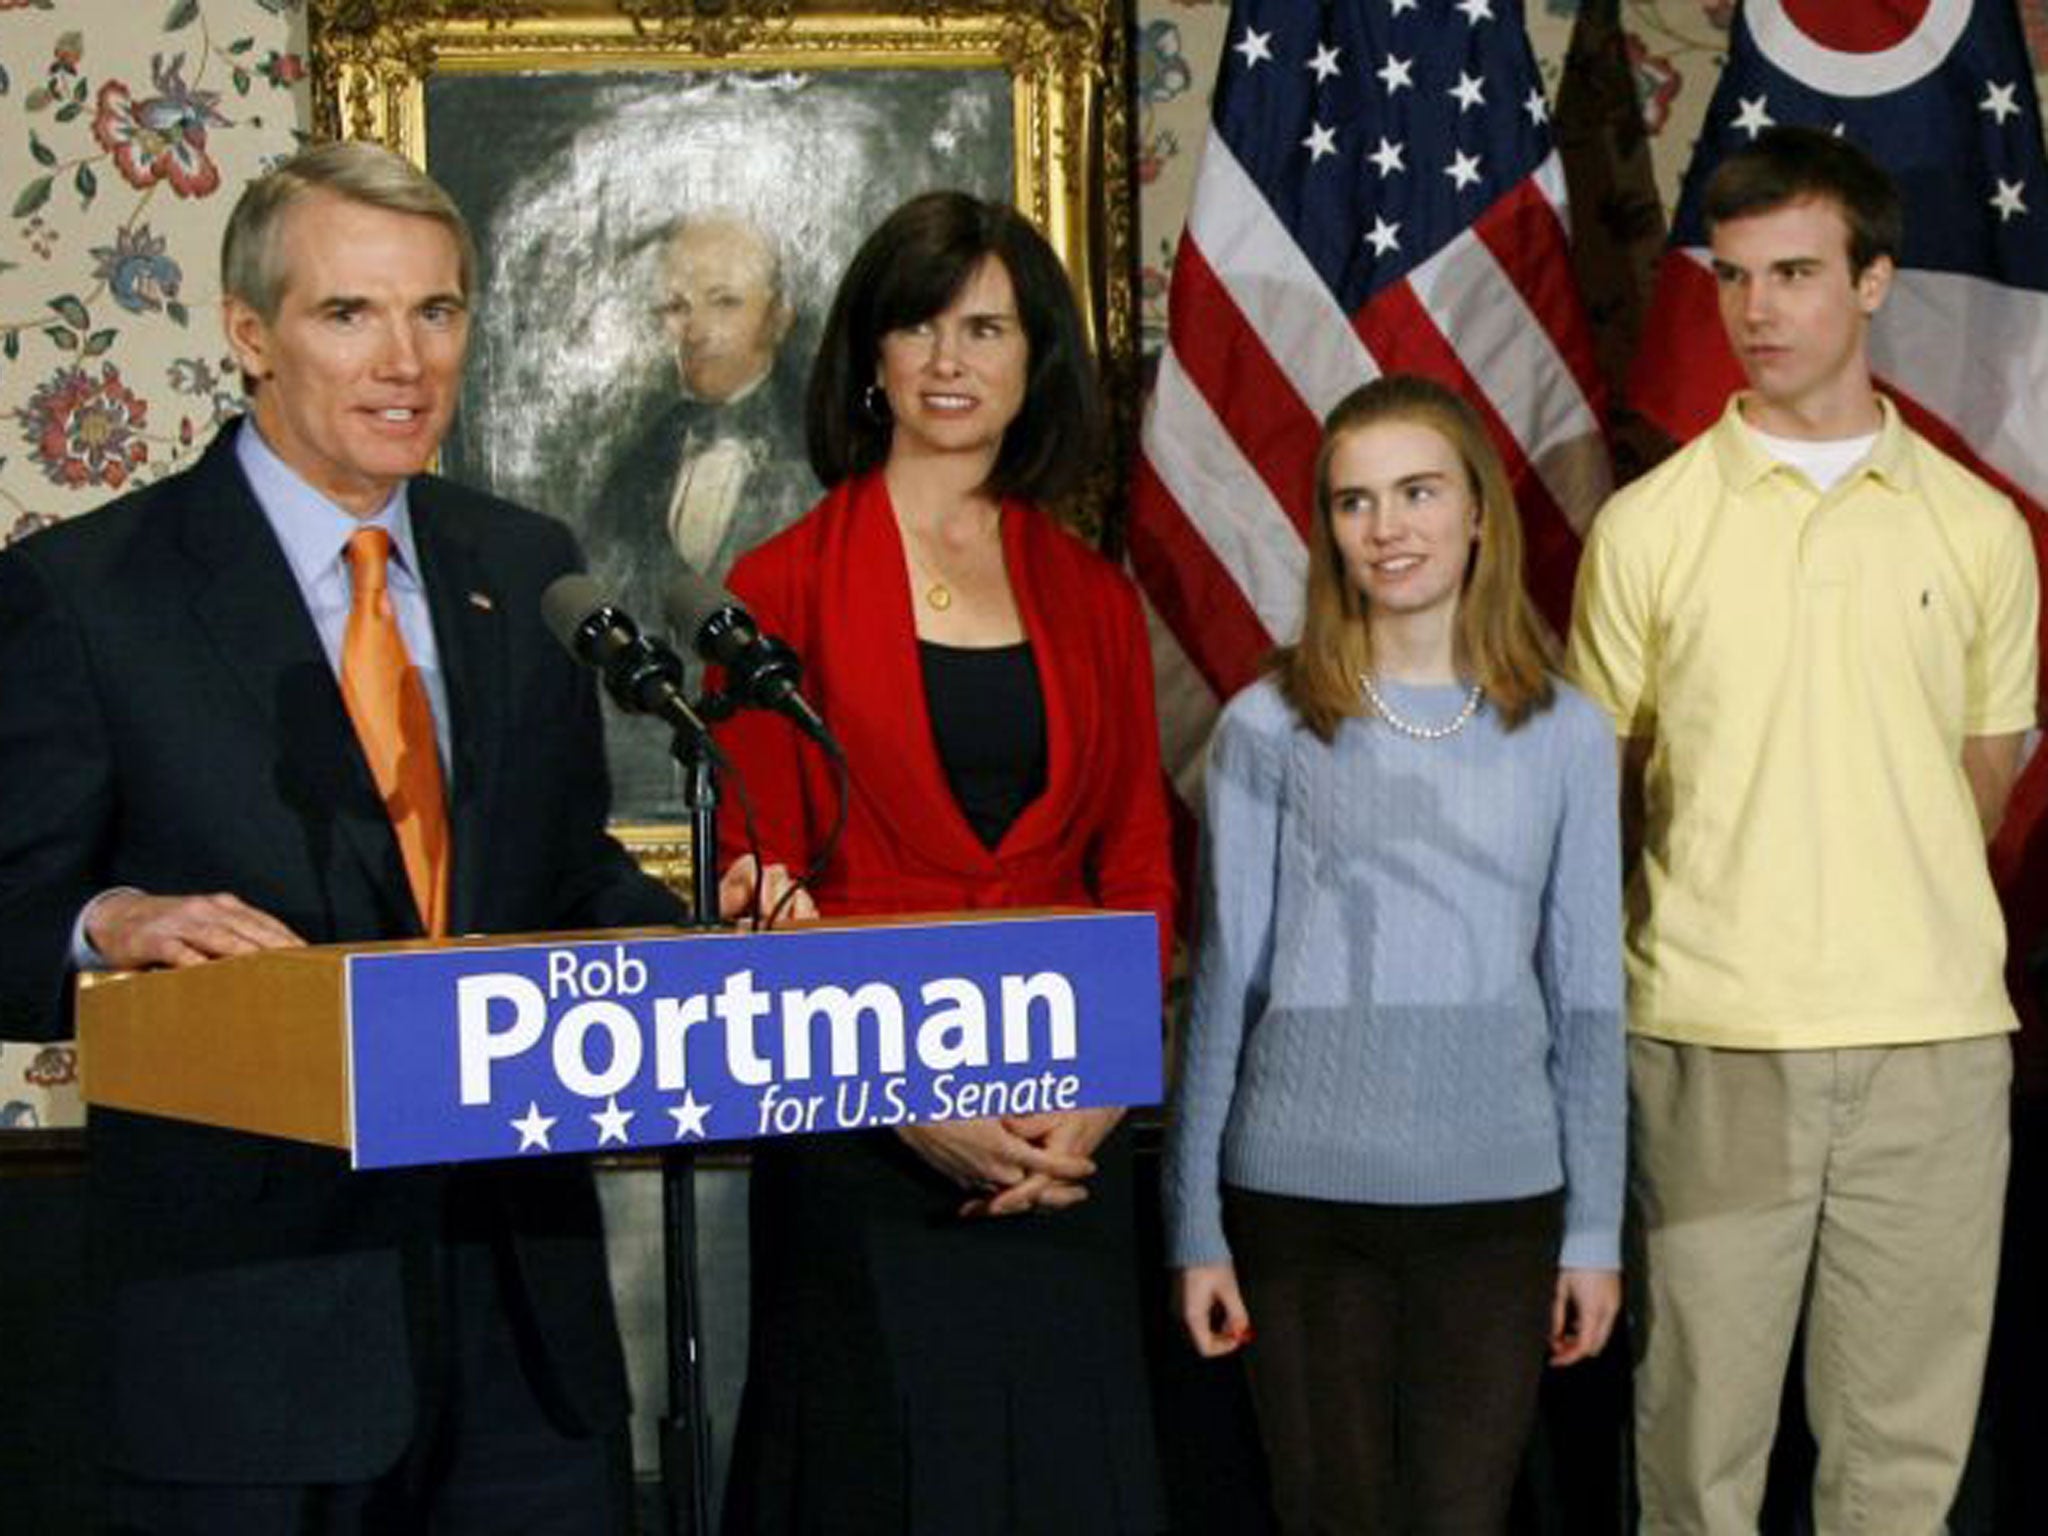 U.S. Sen. Rob Portman, from left, with his wife, Jane, daughter Sally, and son Will,